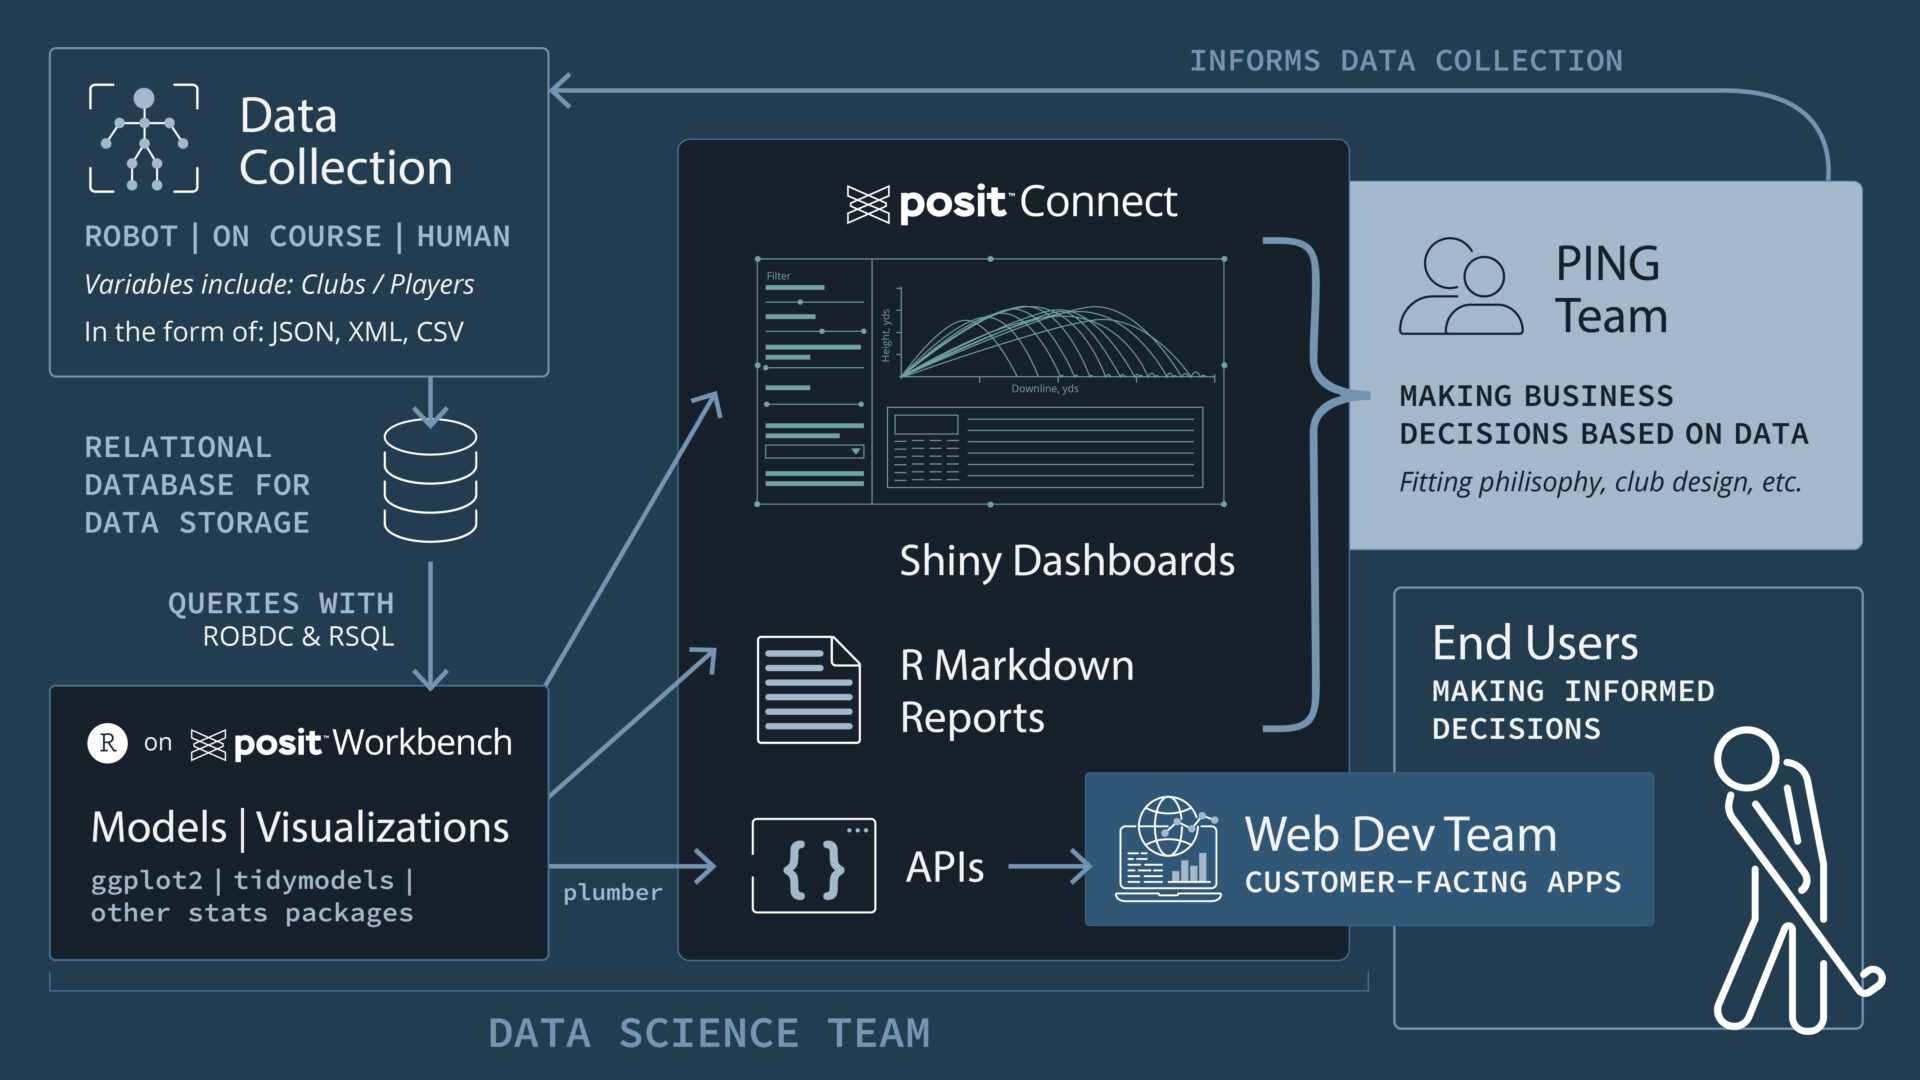 A diagram showing the PING's team data workflow from data collection to a relational database to modeling and visualizing to creating R Markdown and Shiny apps, that get sent to the PING team for decision making, and APIs that get sent to the web dev team for developing customer-facing apps.